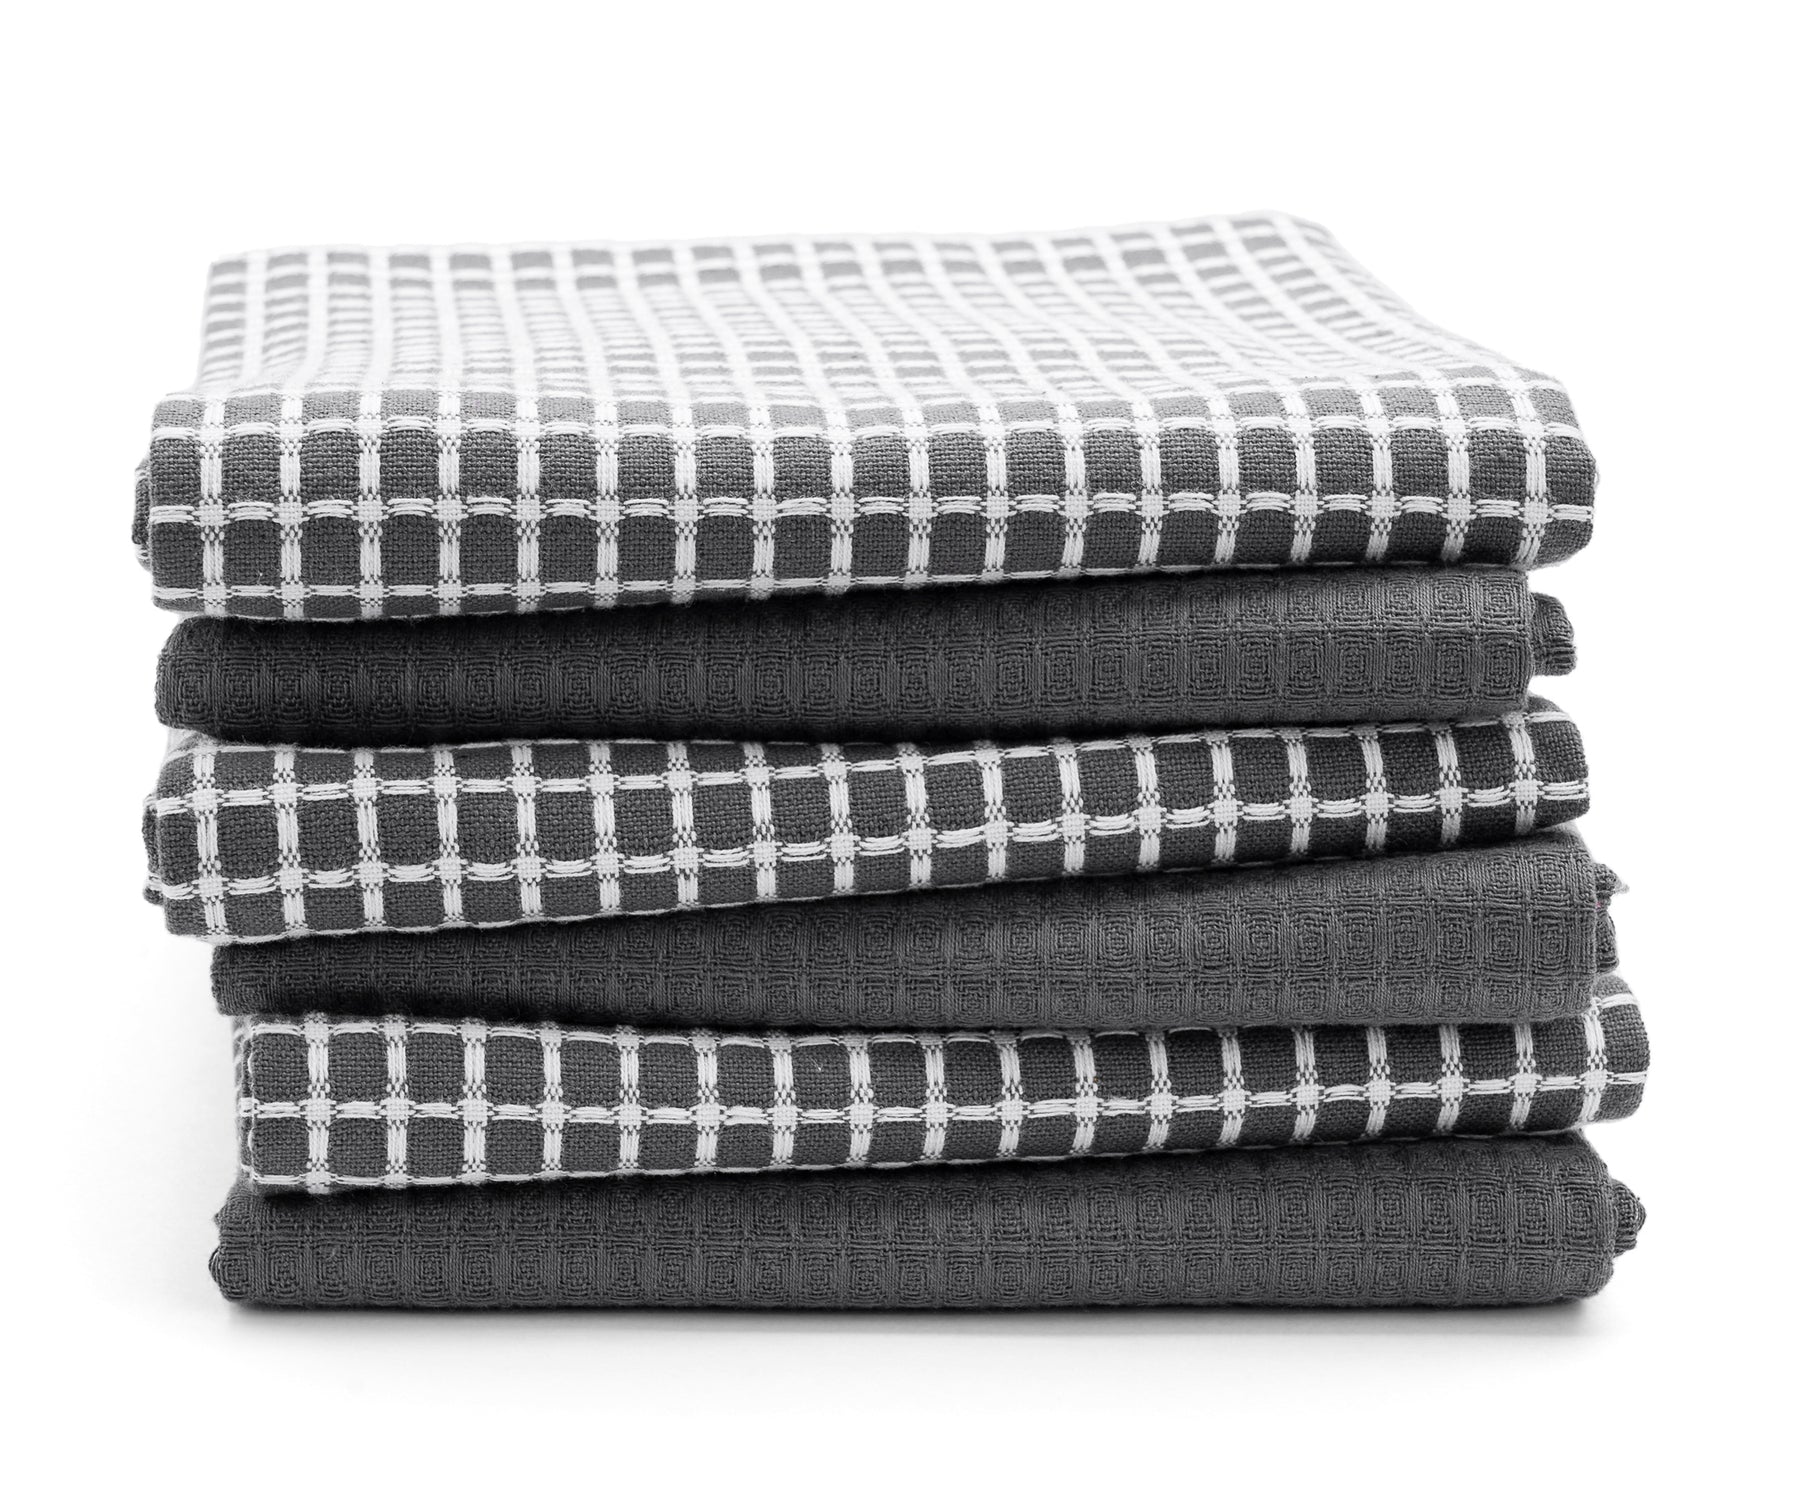 buffalo check kitchen towels set of 6, gray and white checked dish towels or dishcloths sets.